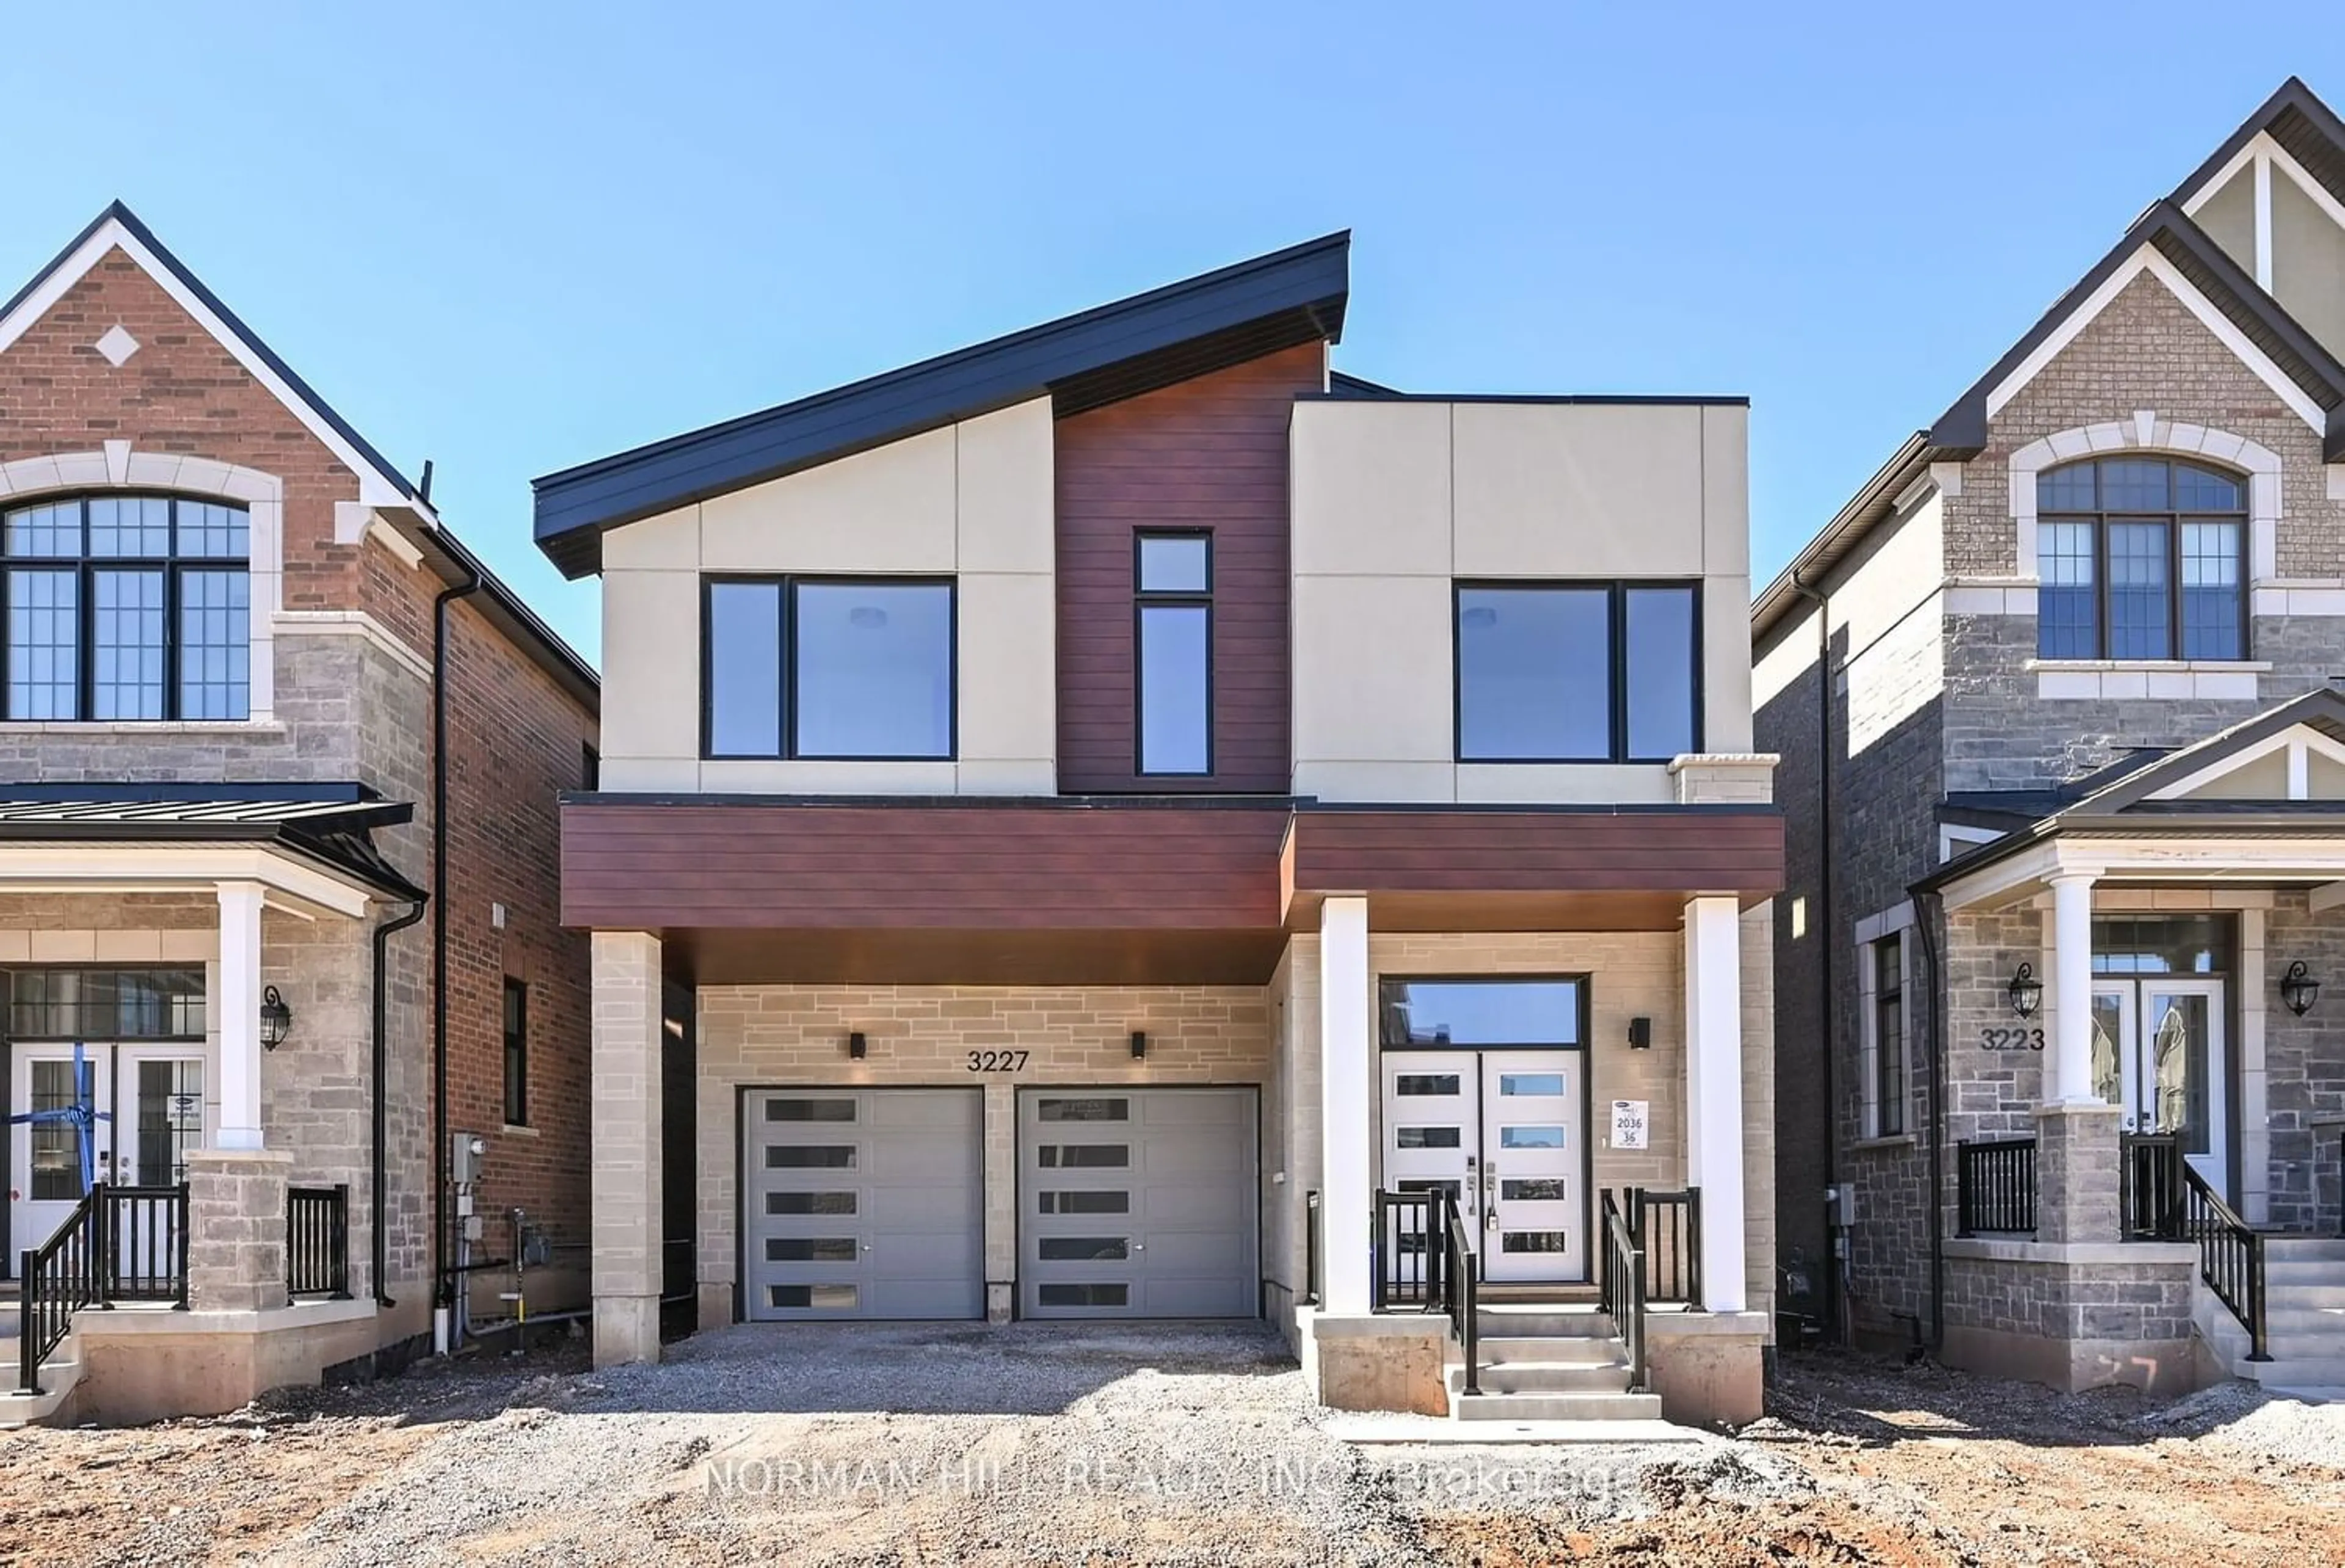 Home with brick exterior material for 3227 Harasym Tr, Oakville Ontario L6M 5N7